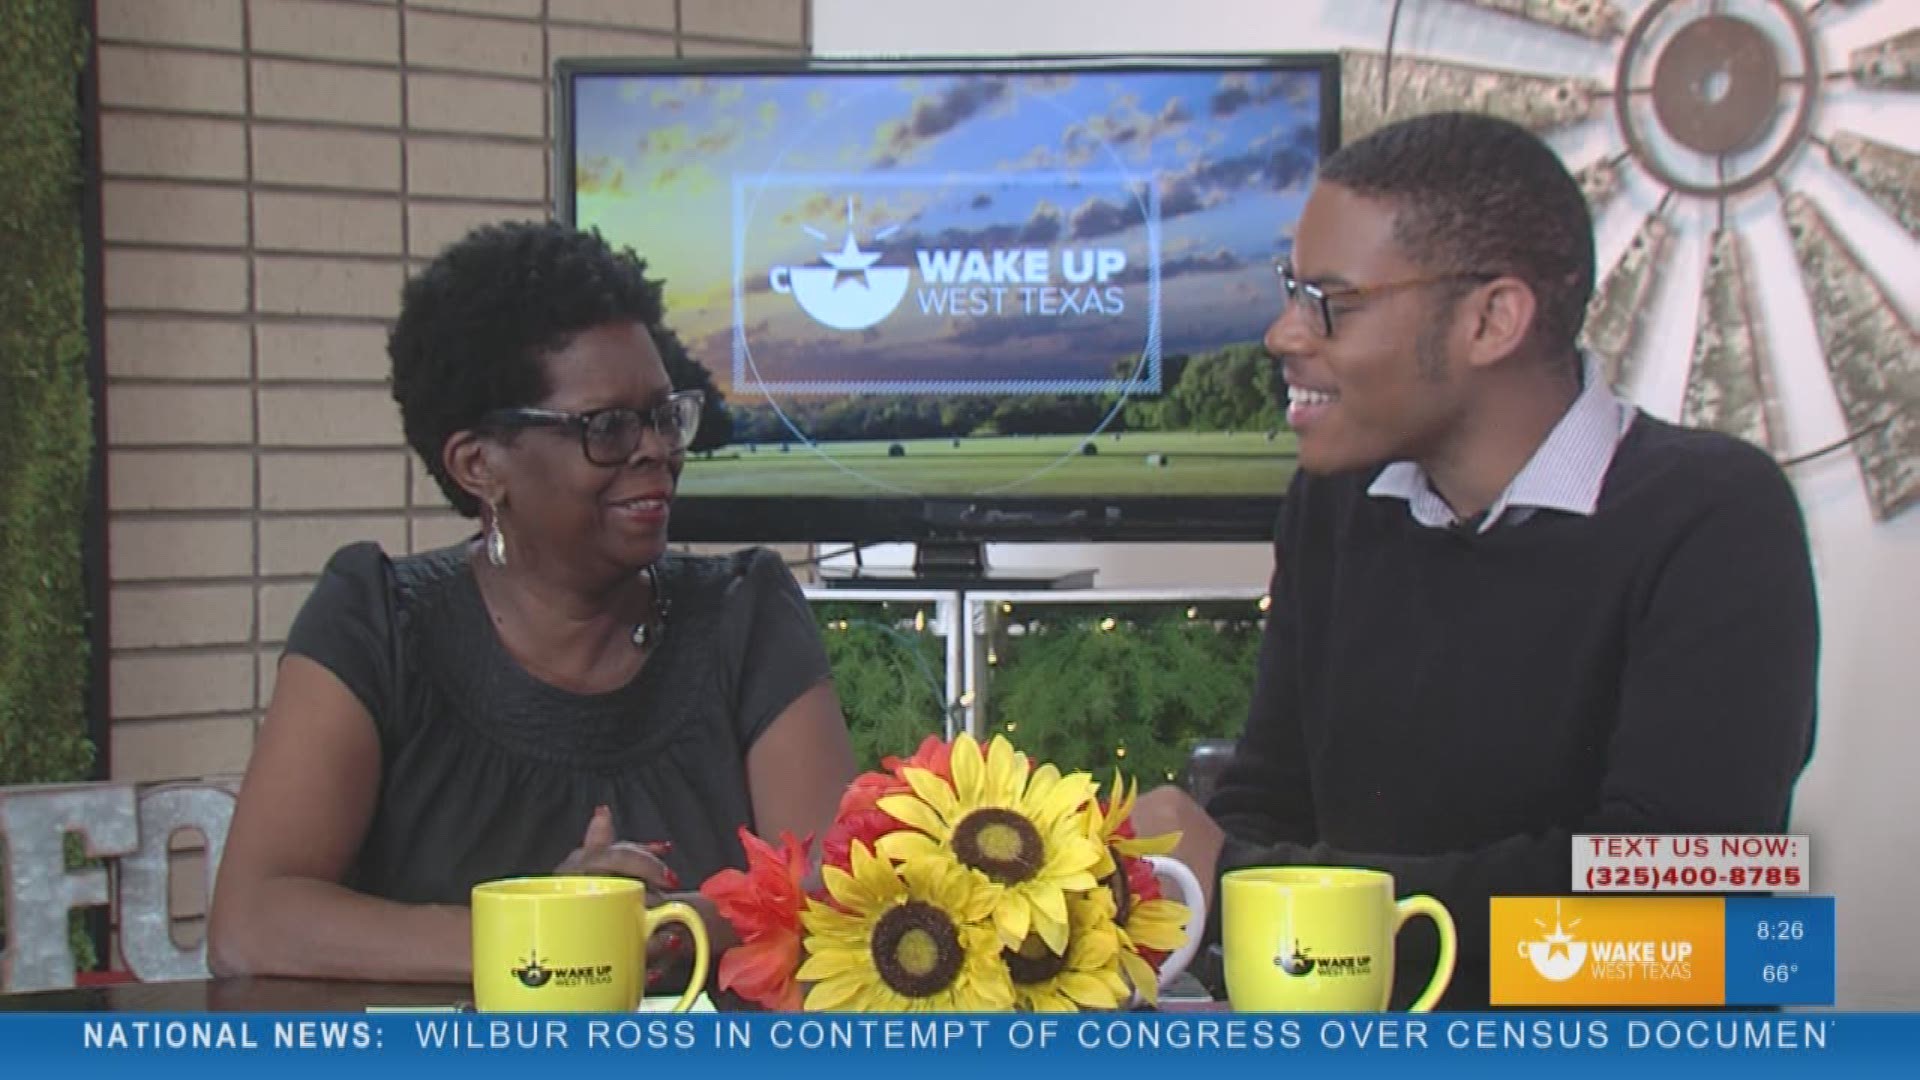 Our Malik Mingo spoke with the president of the National Association for the Advancement of Colored People (NAACP) about the annual Juneteenth parade scheduled for June 15.